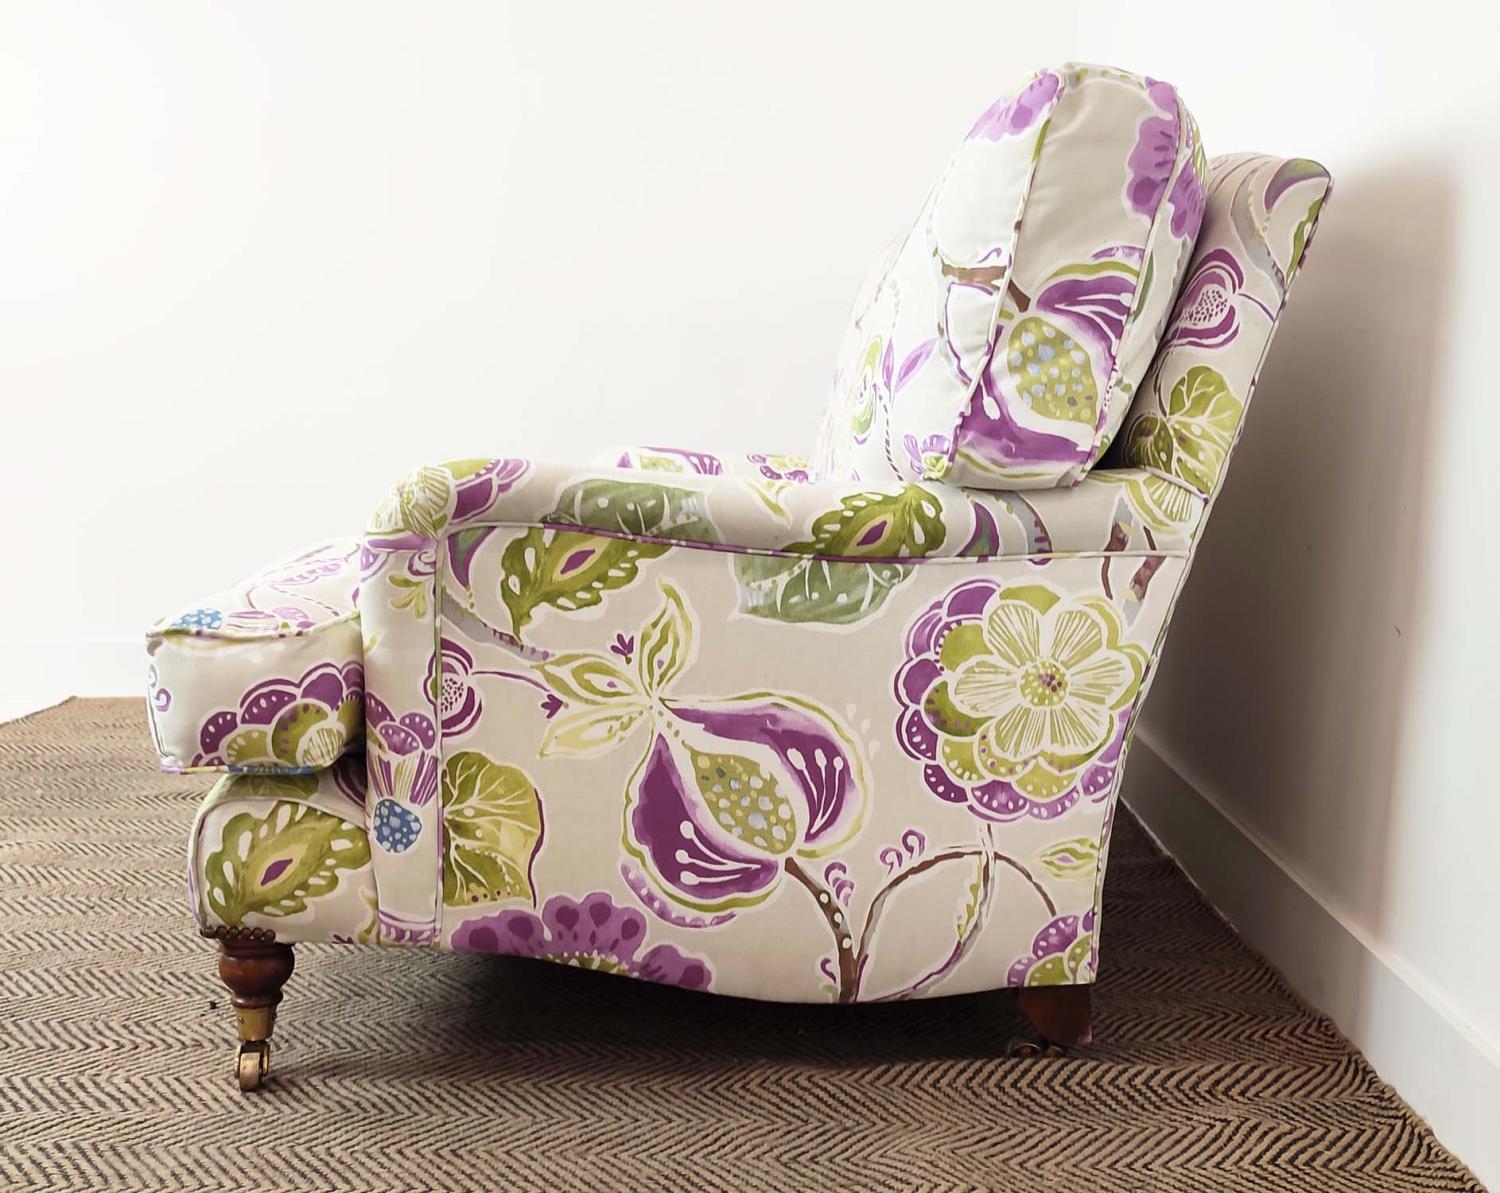 SOFA, purple and green floral patterned on brass castors, 90cm H x 160cm W. - Image 9 of 14